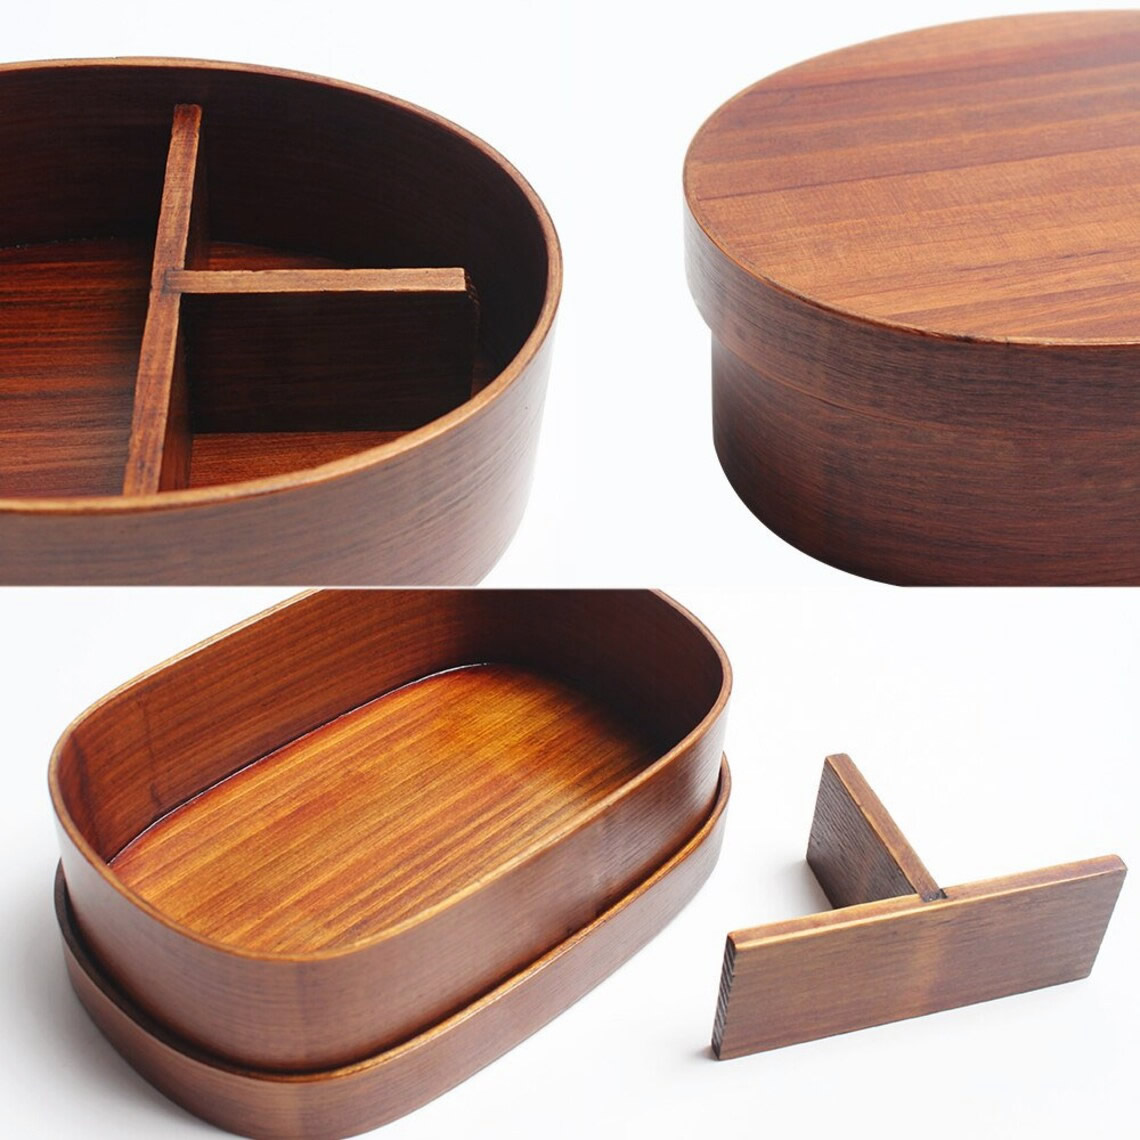 Willow Wood Oval Bento Box Set Details